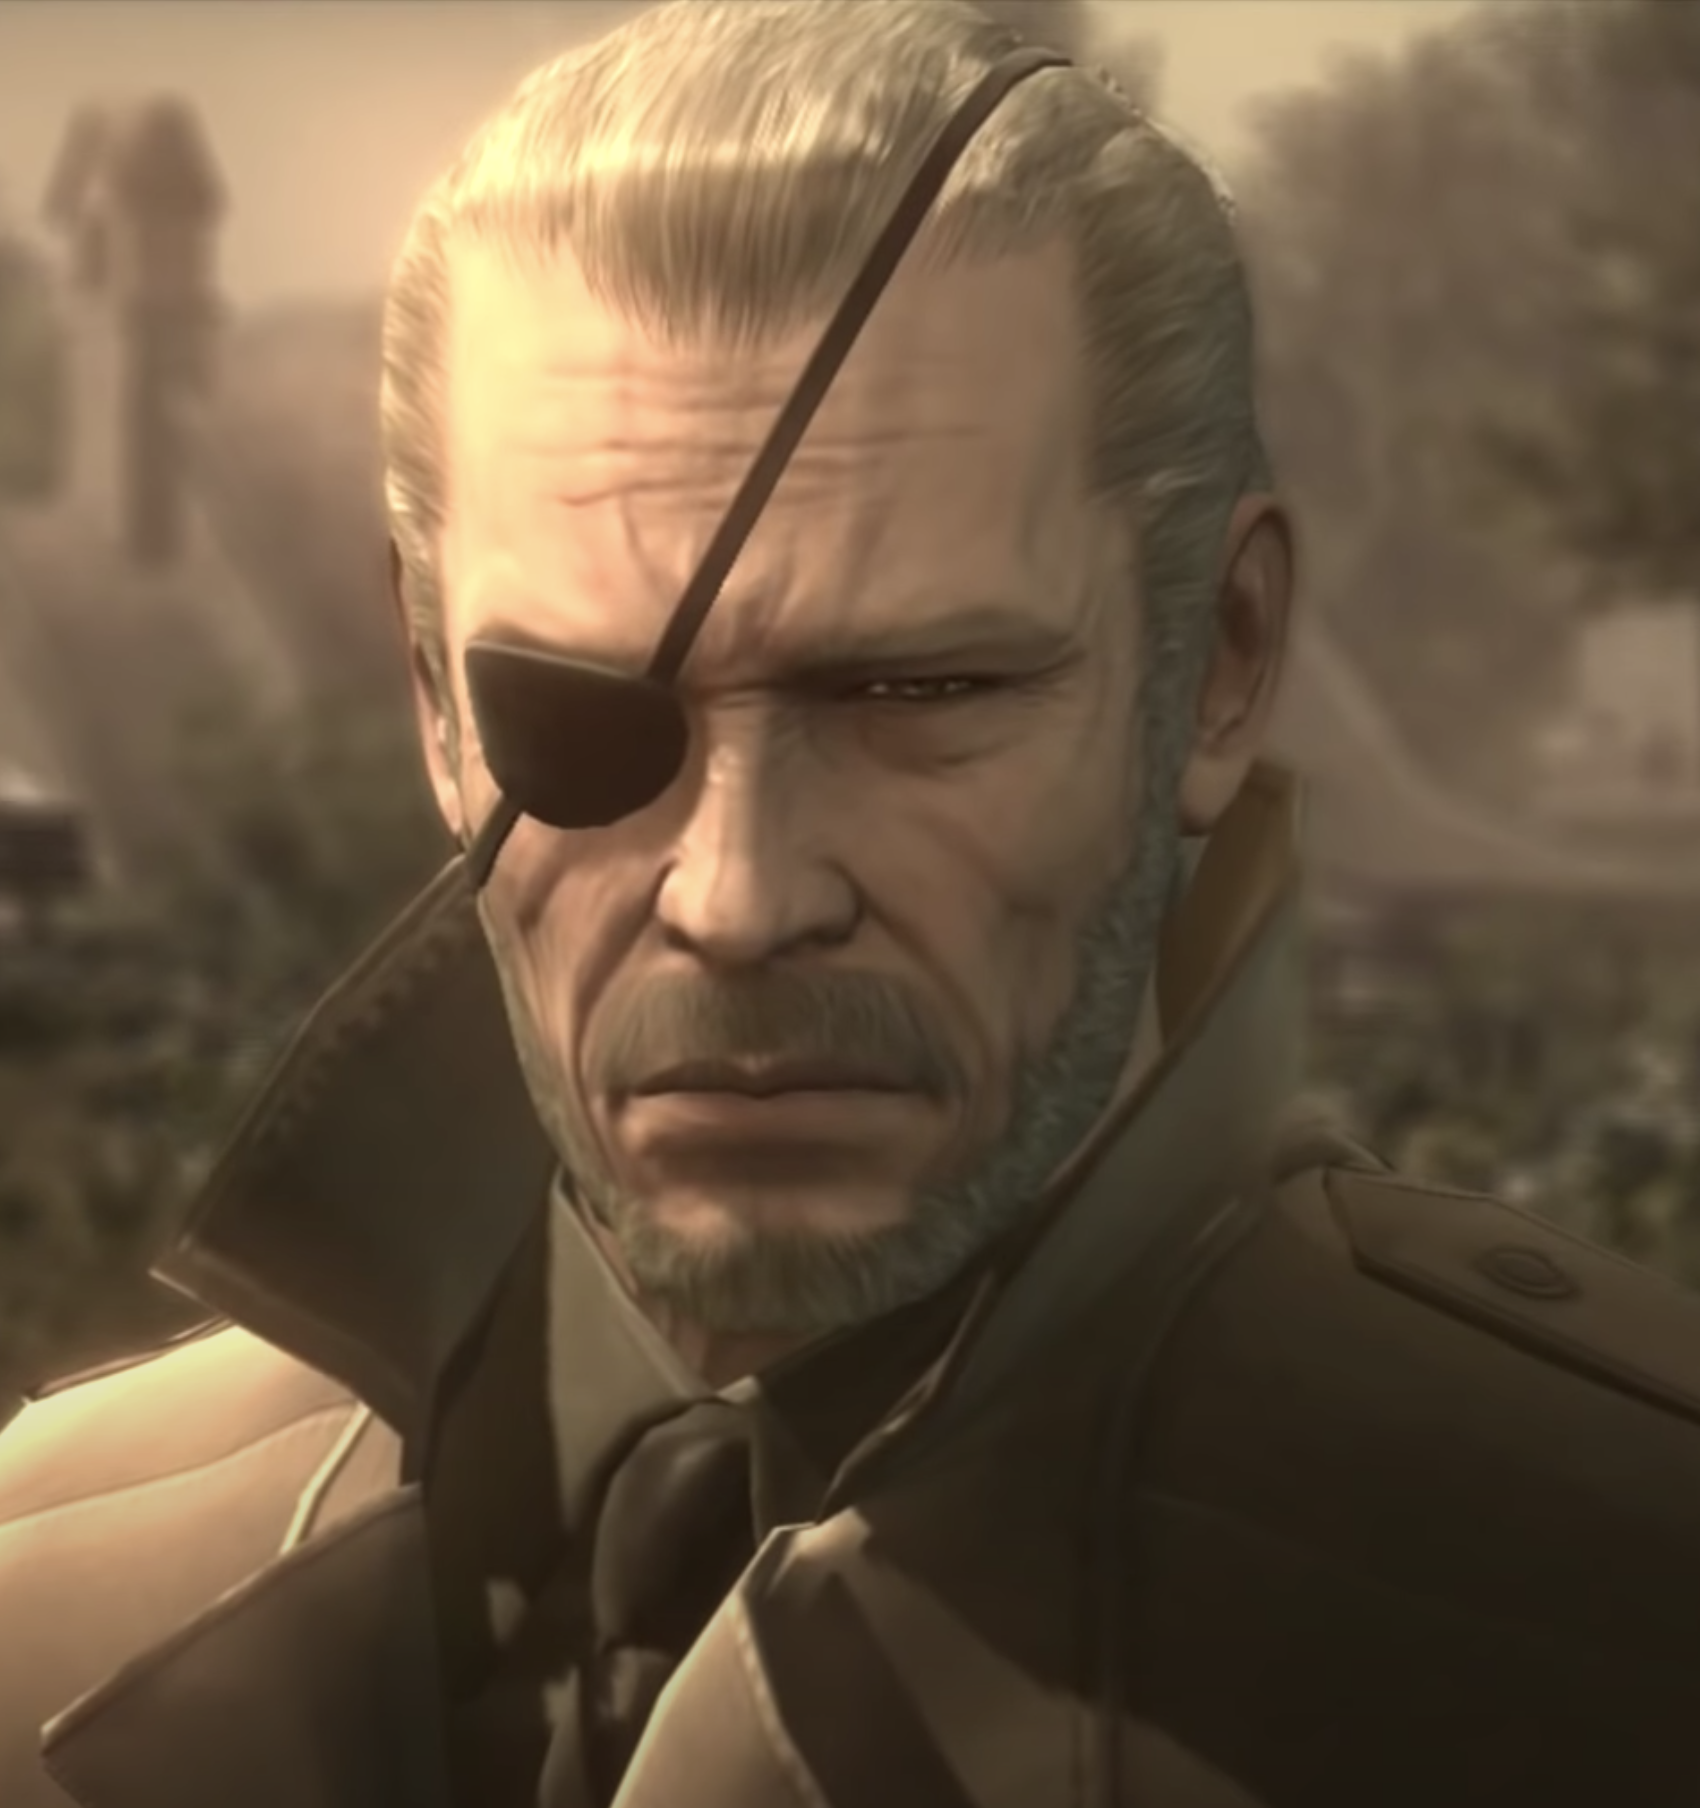 What's Big Boss's real name?